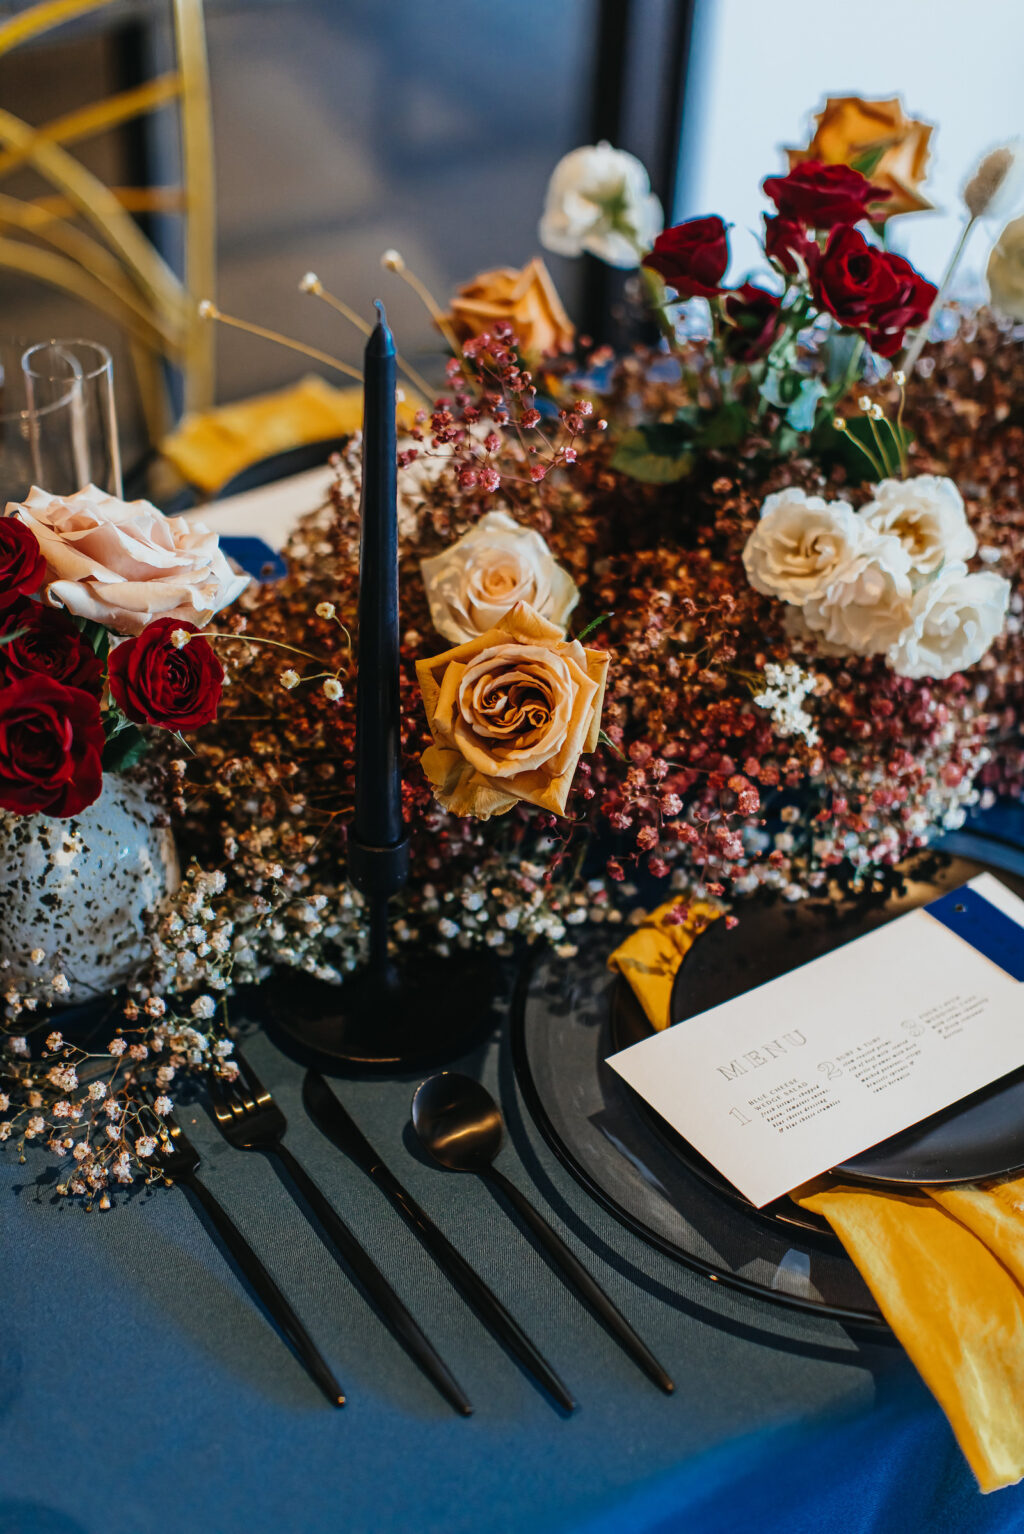 Modern and Edgy Fall Wedding Reception Decor, Royal Blue Table Linen, Vintage Water Goblets, Black Flatware, Blush Pink, Red and Yellow Roses, Pink and White Babys Breathe Flower Low Centerpieces, Clear Glass Chargers, Yellow Linen Napkin, Blue Candlestick | Tampa Bay Wedding Rentals Kate Ryan Event Rentals